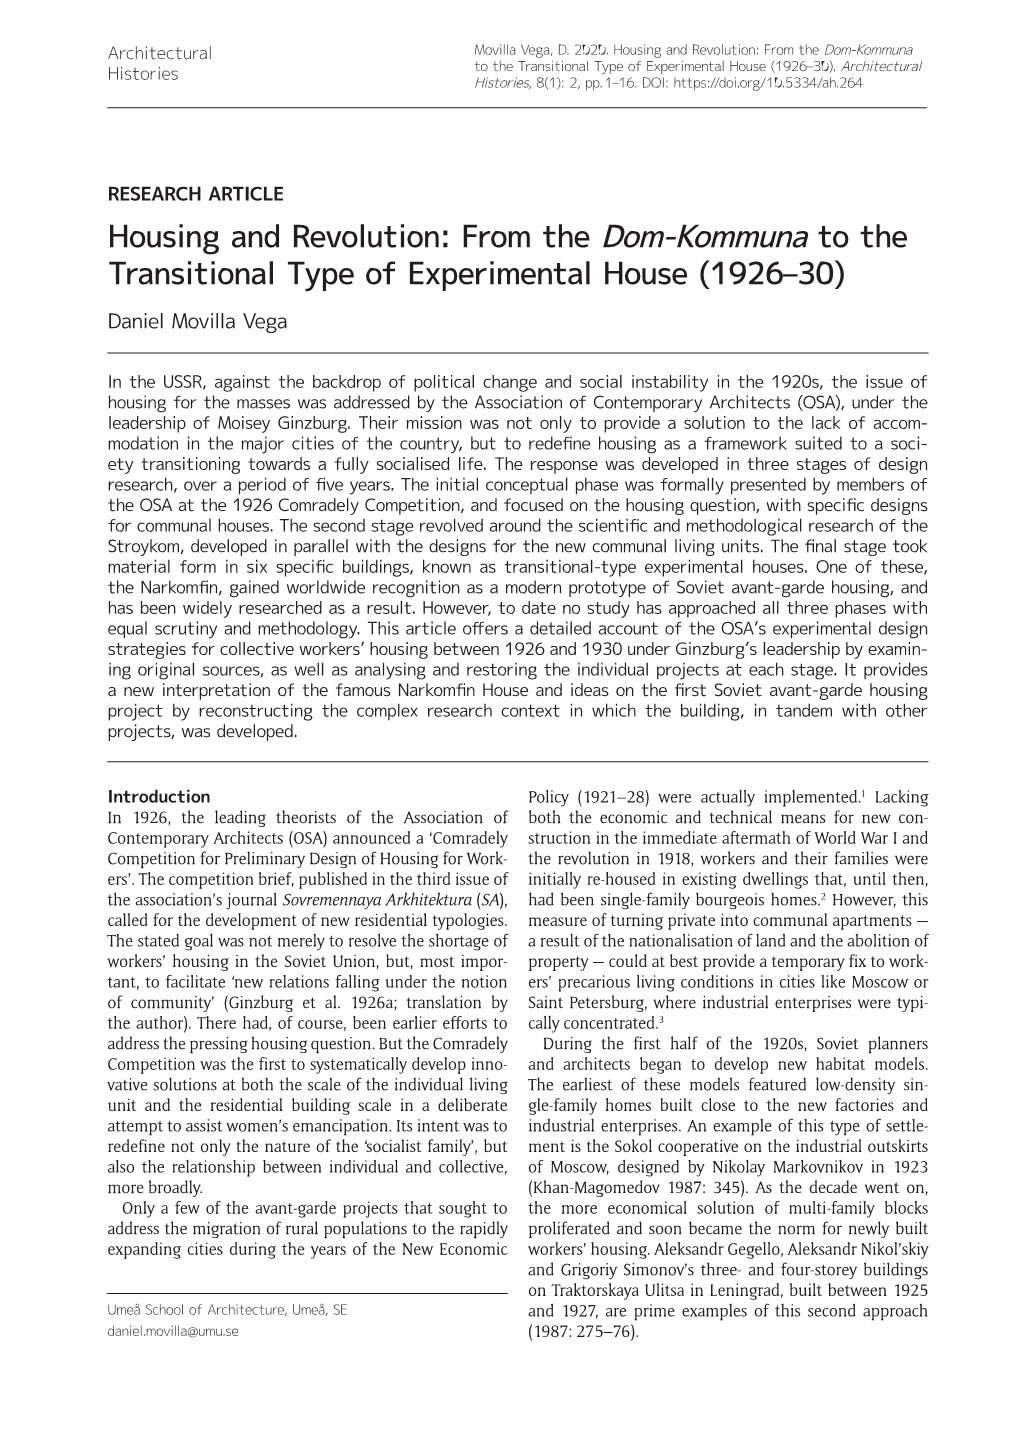 Housing and Revolution: from the Dom-Kommuna to the Transitional Type of Experimental House (1926–30)